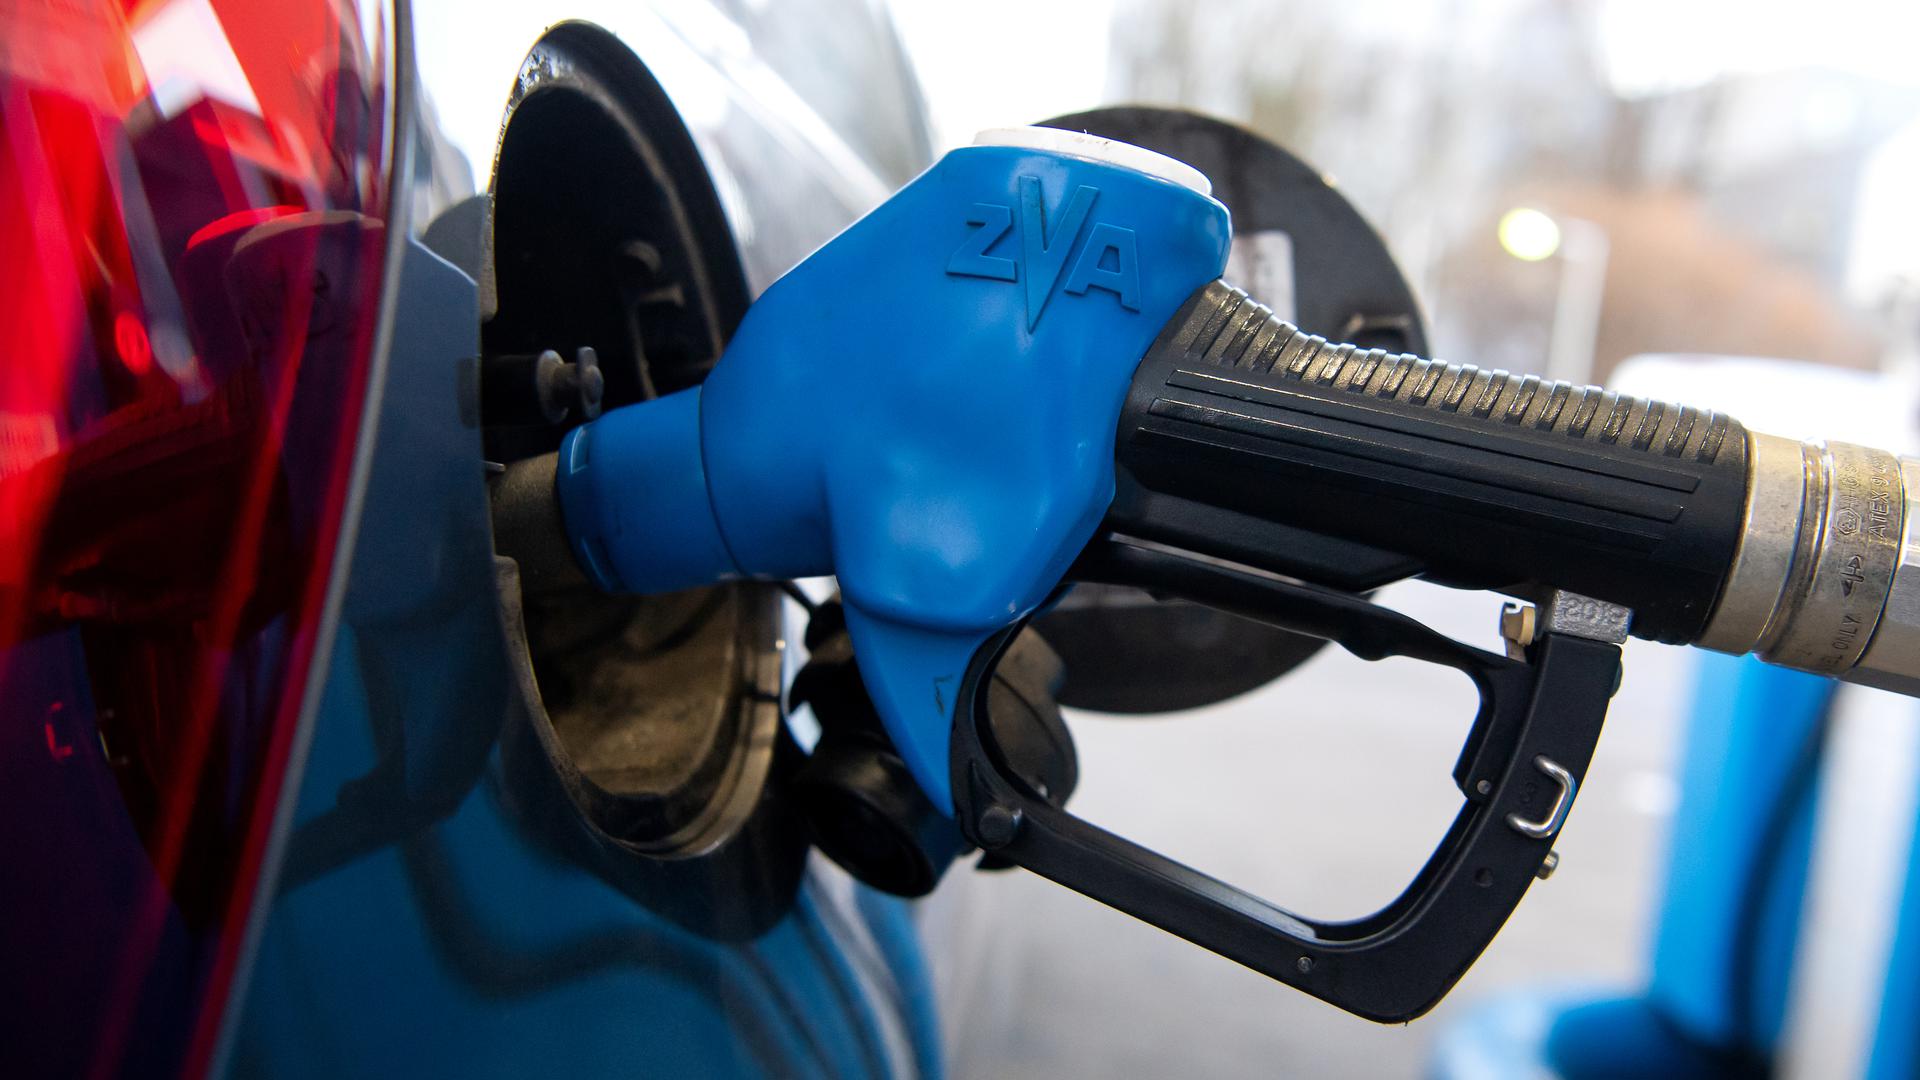 Diesel prices jumped by 15% and petrol by 9% in Luxembourg in the space of just a month from February to March